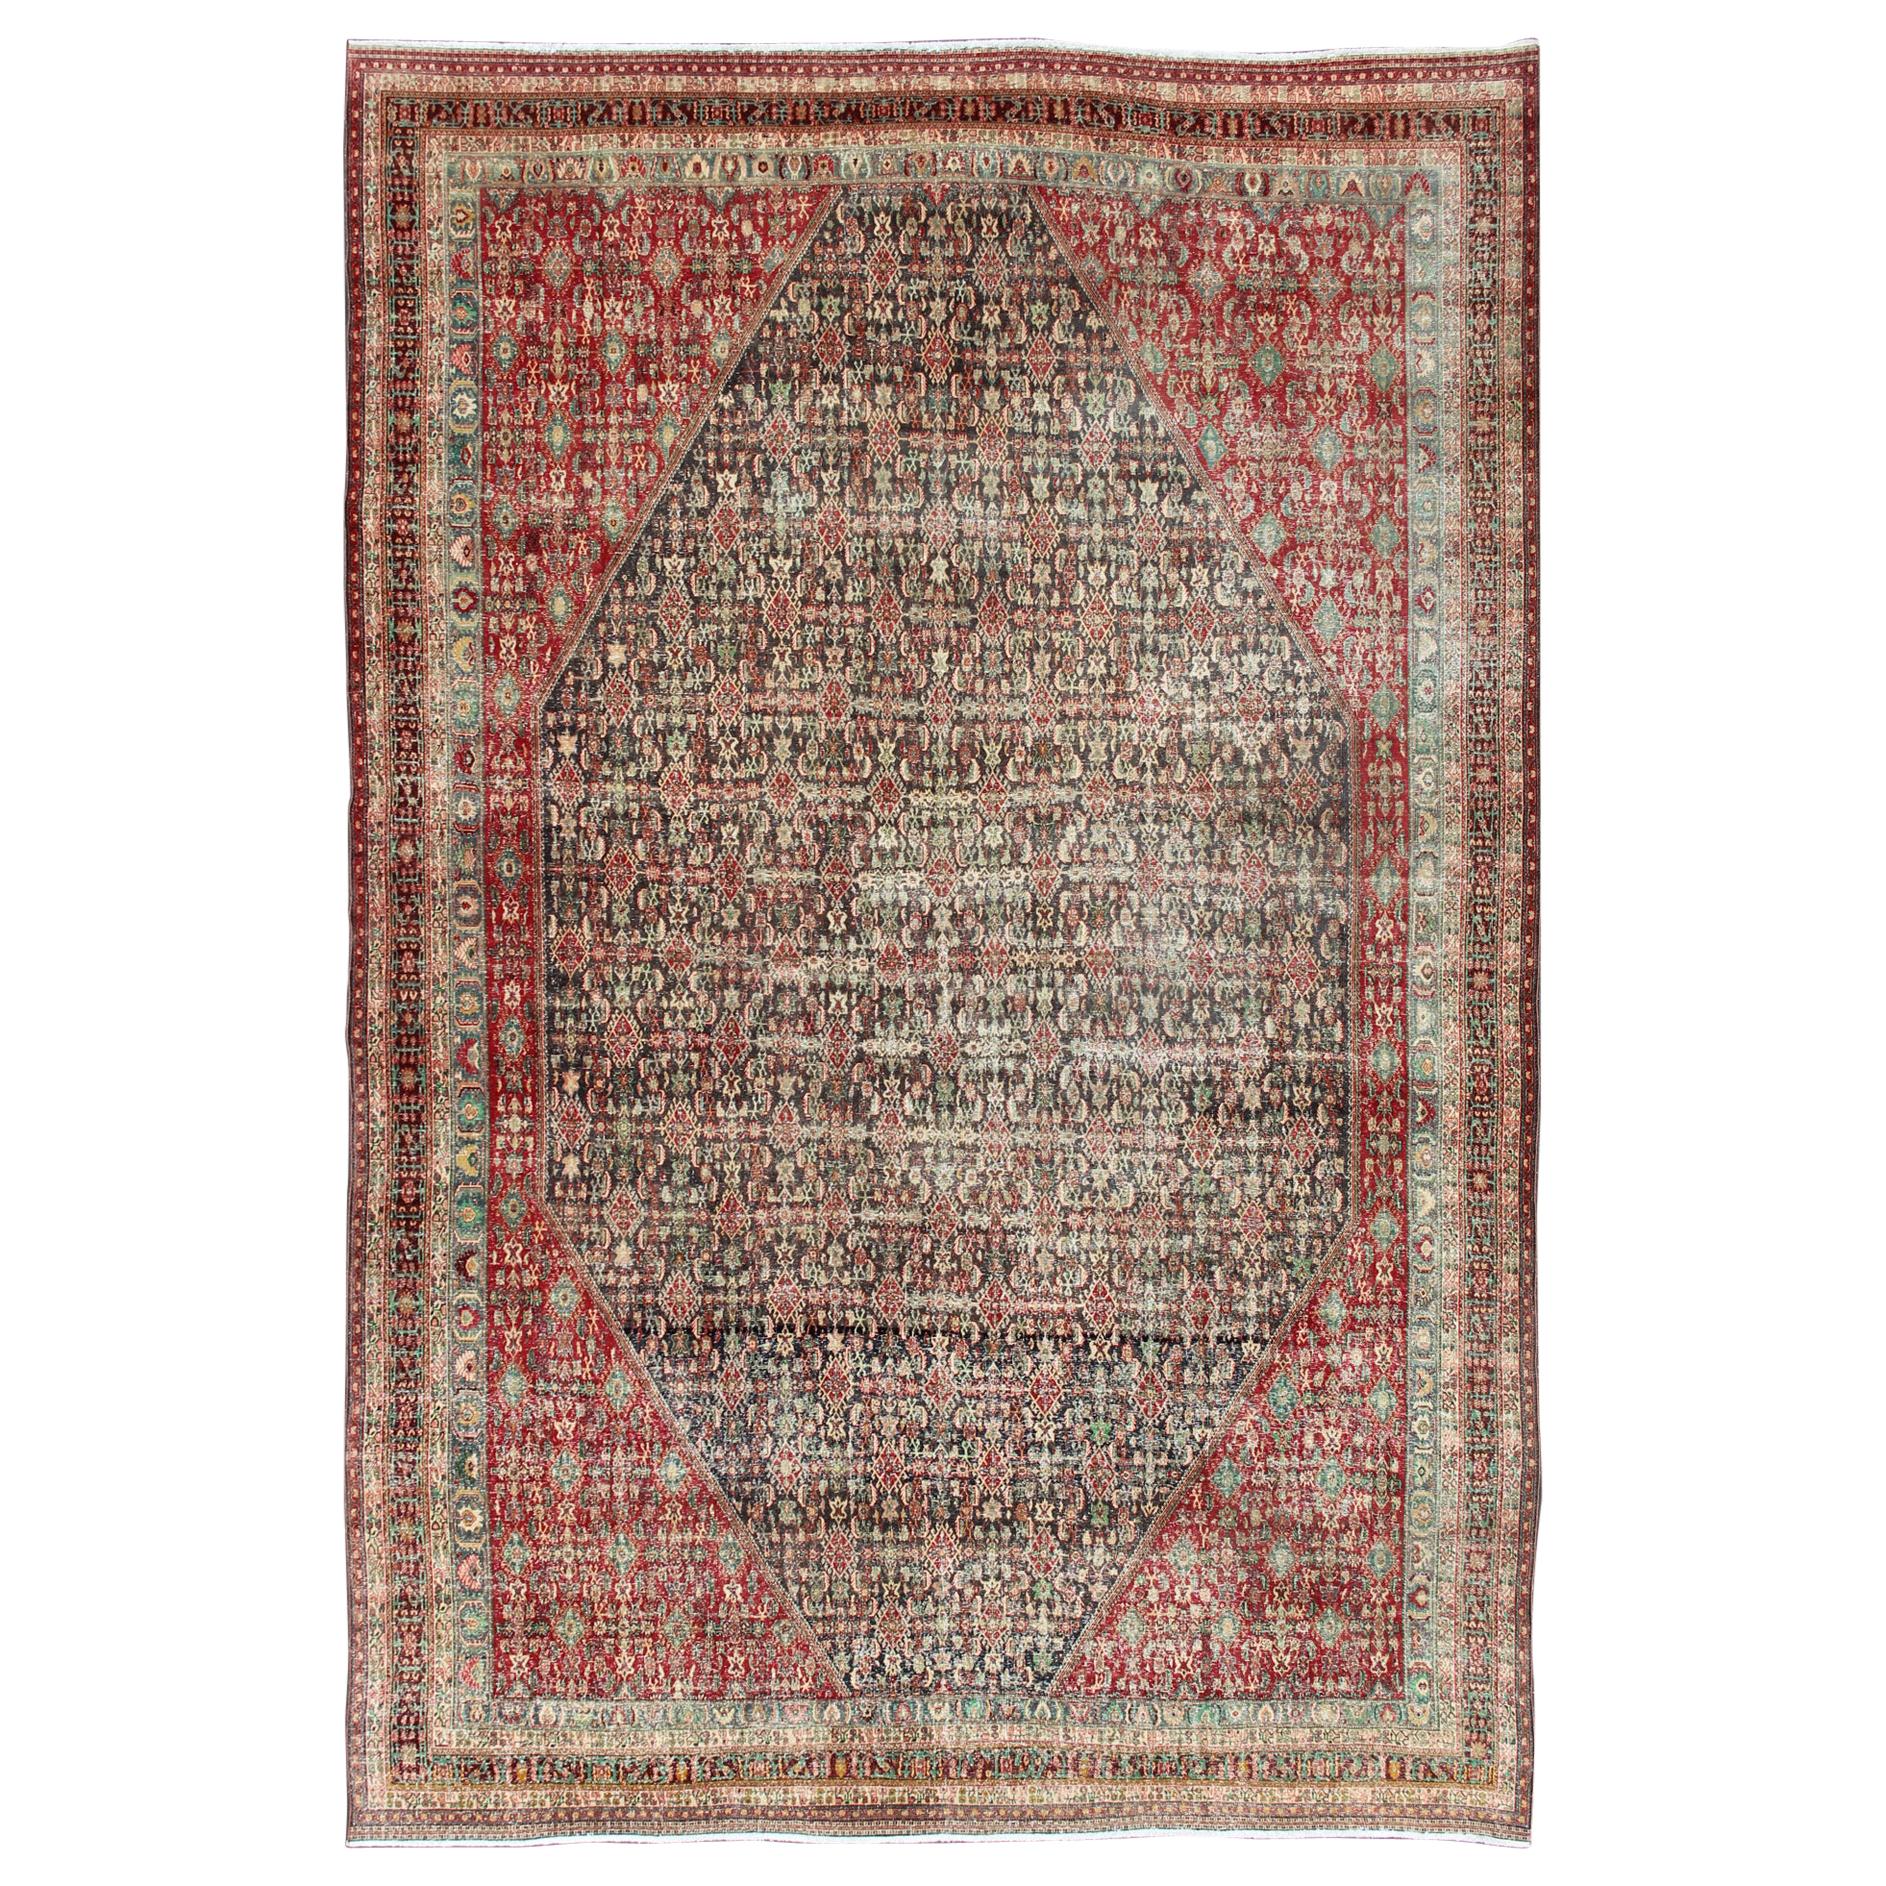 Colorful Large Persian Antique Qashqai rug with A Beautiful Tribal Motif Design For Sale